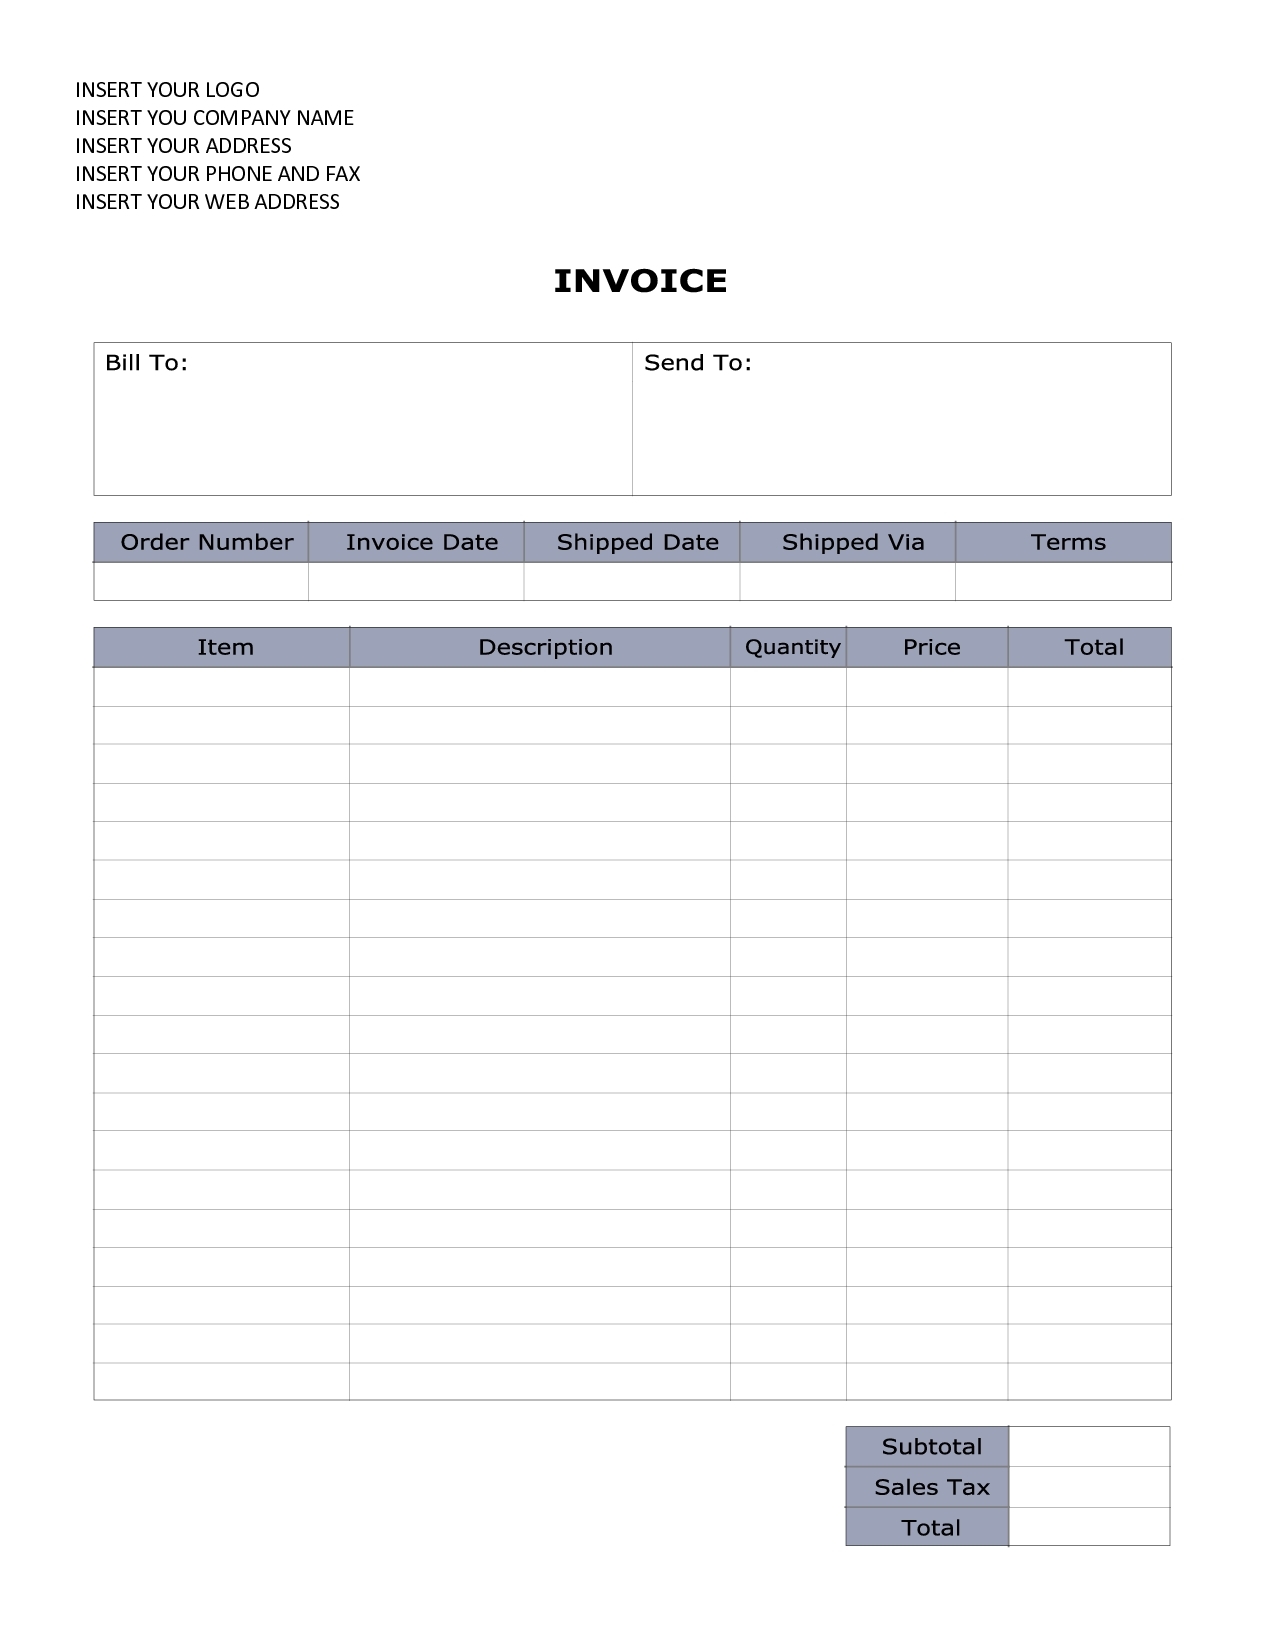 invoice template word format word document invoice template sales invoice sample word olbghygl 1275 X 1650